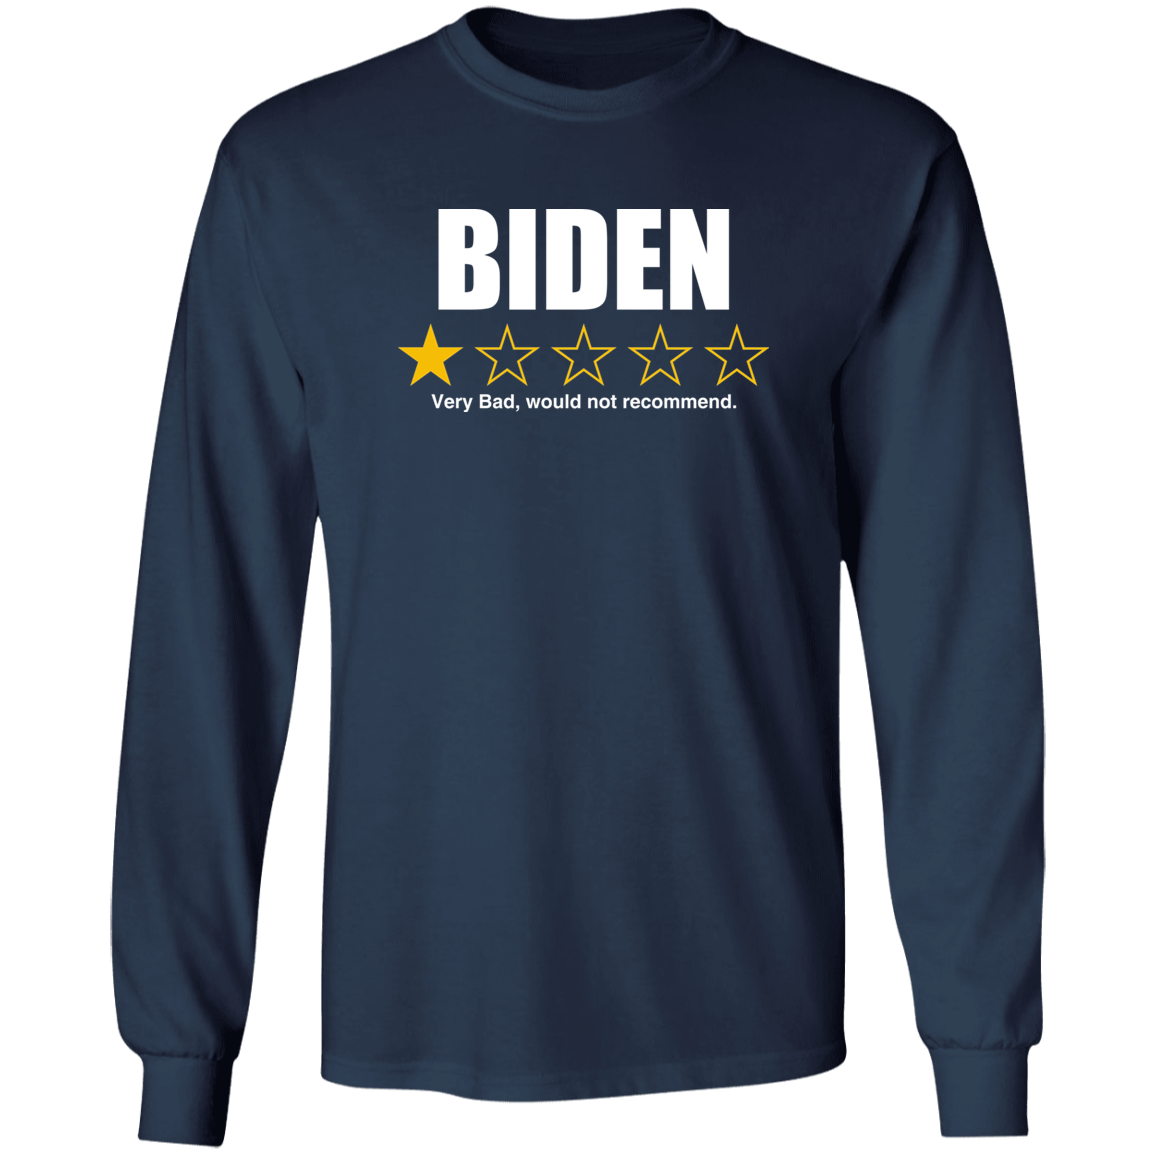 1 Star Rating - BIDEN Not Recommended